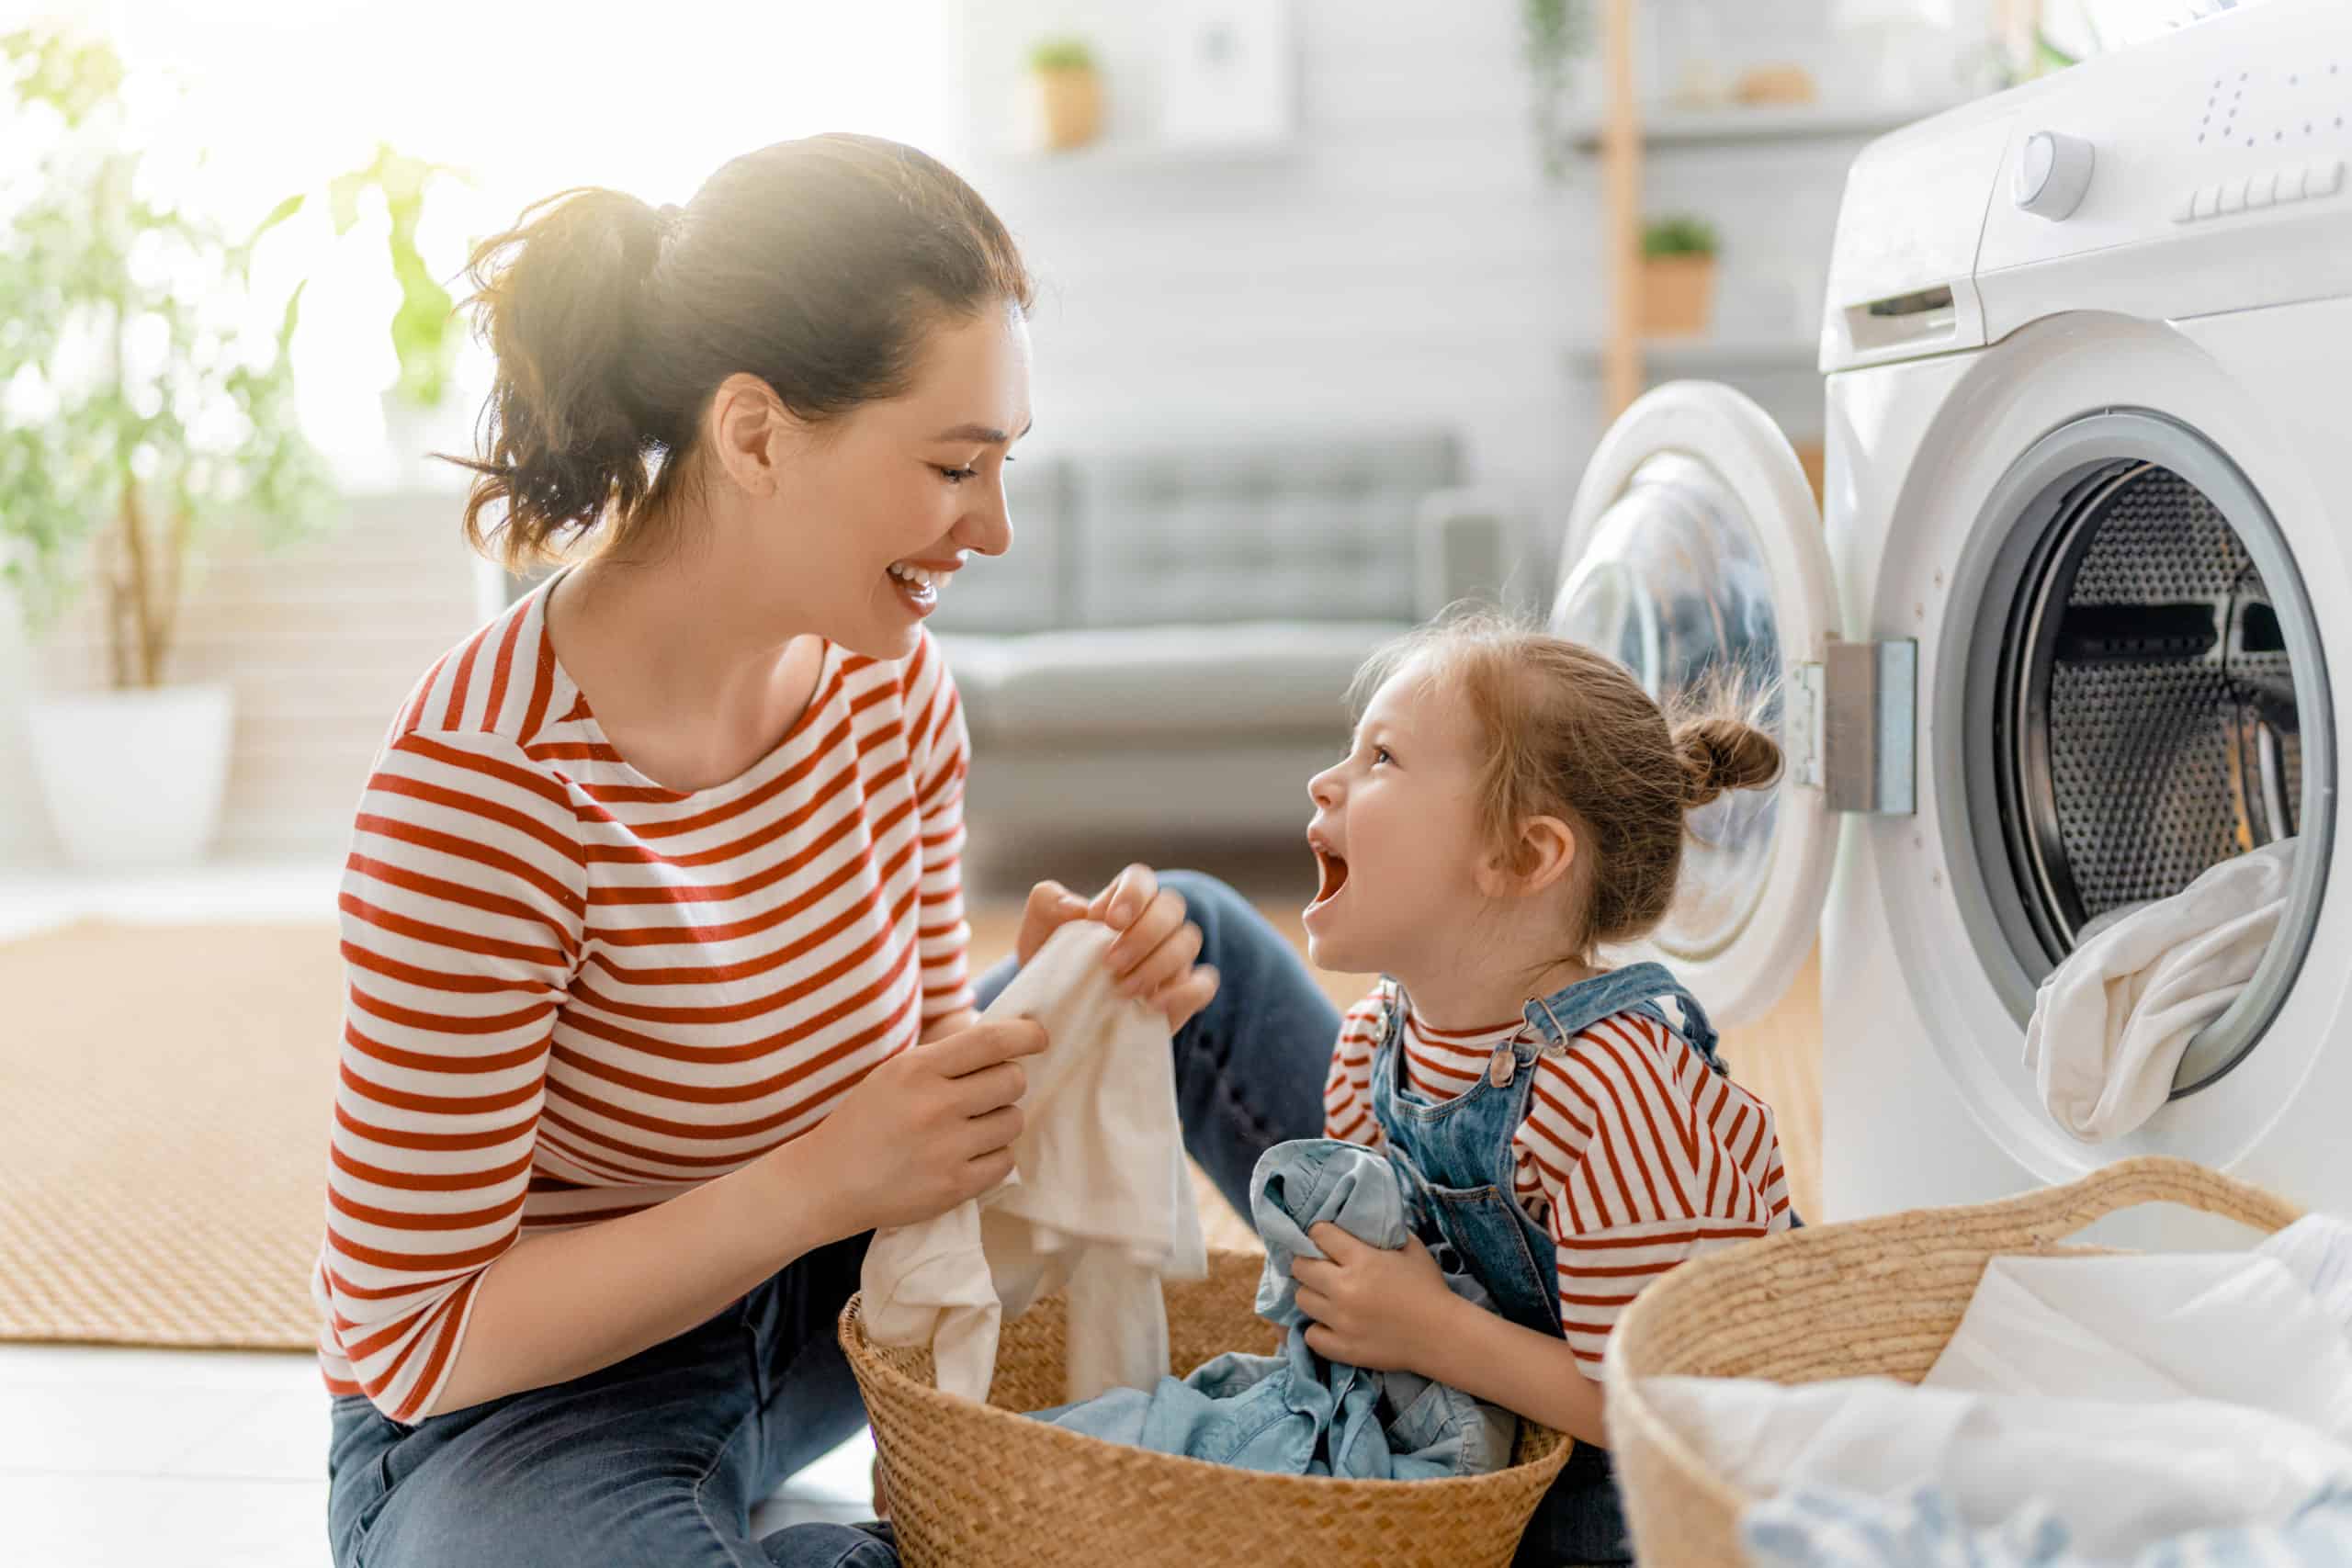 A picture of a young woman and her daughter smiling and folding clothes outside their dryer.